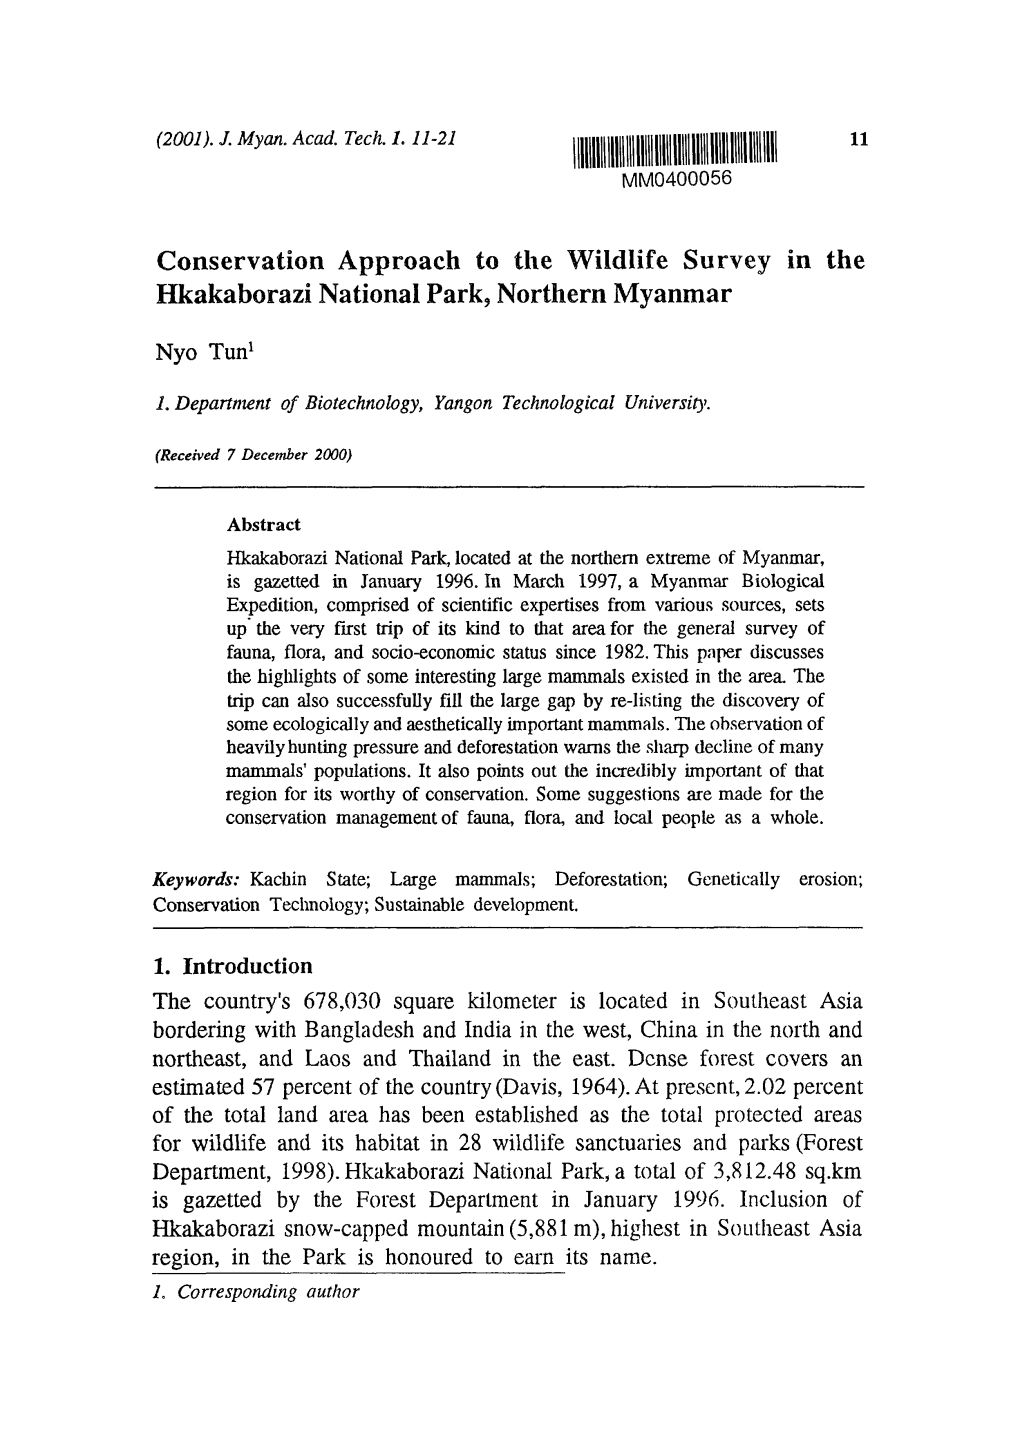 Conservation Approach to the Wildlife Survey in the Hkakaborazi National Park, Northern Myanmar